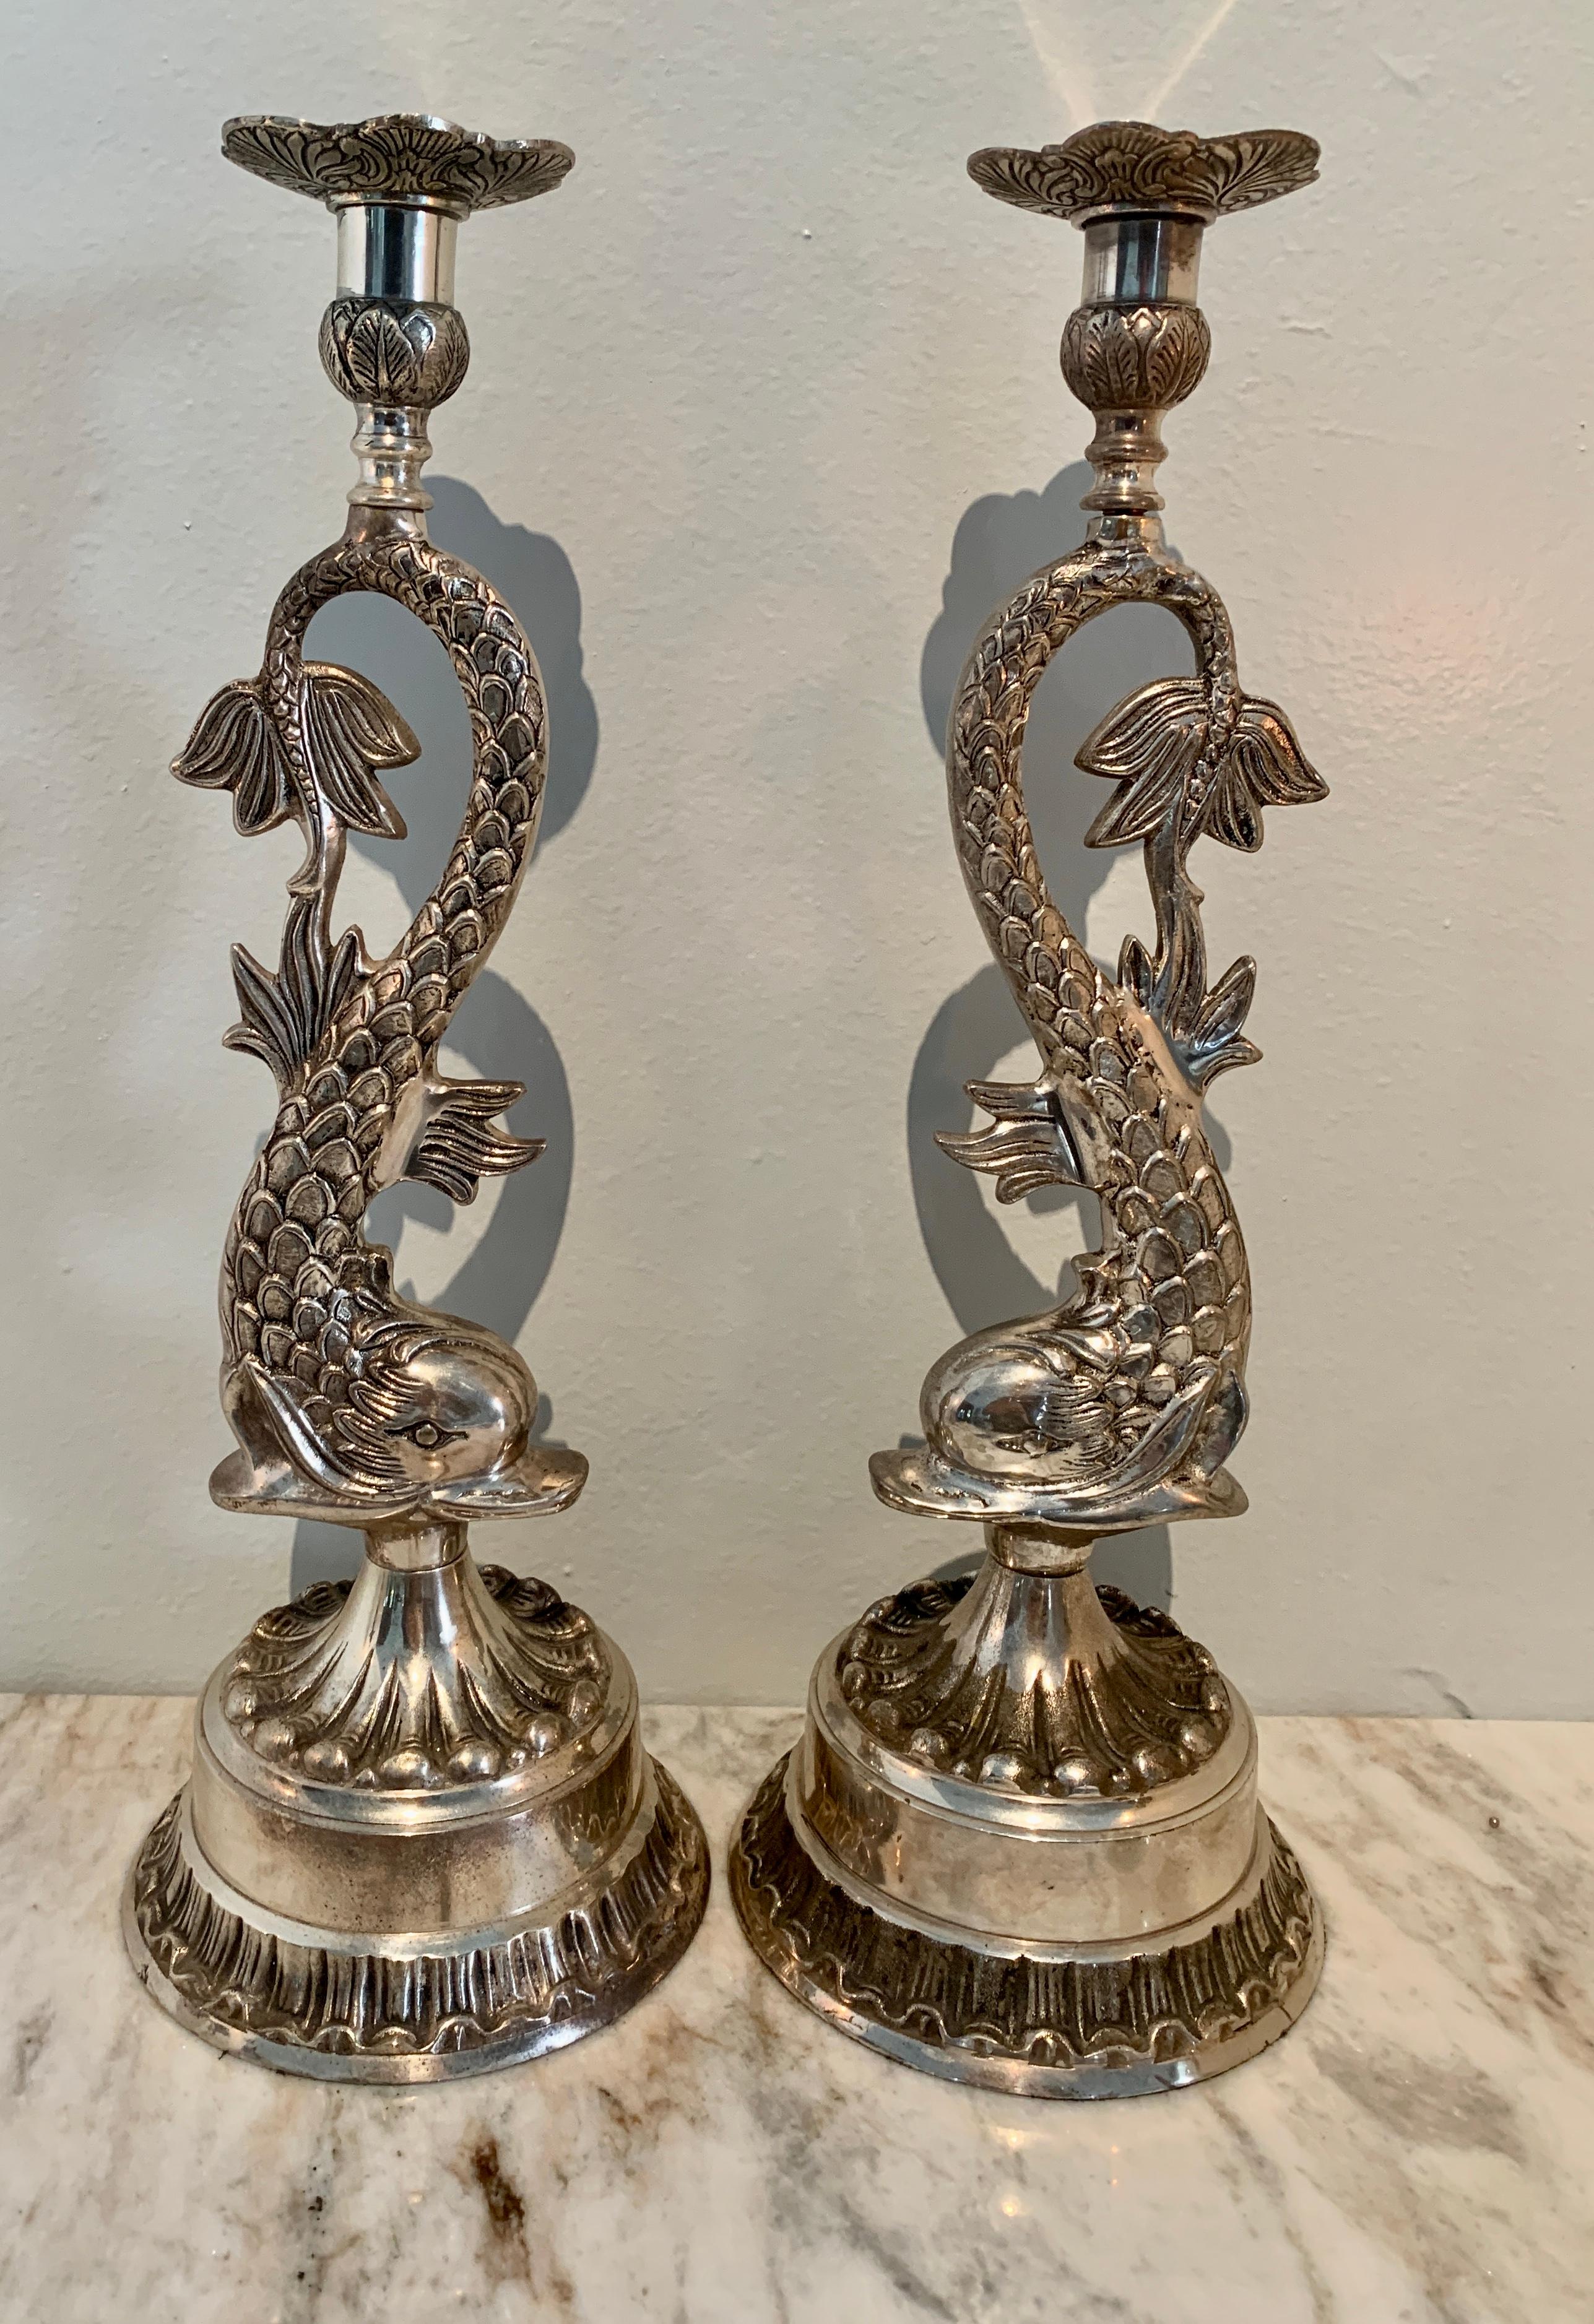 Pair of tall and impressive dolphin candlesticks. The pair are perfectly suited for the dining table or atop a mantle.